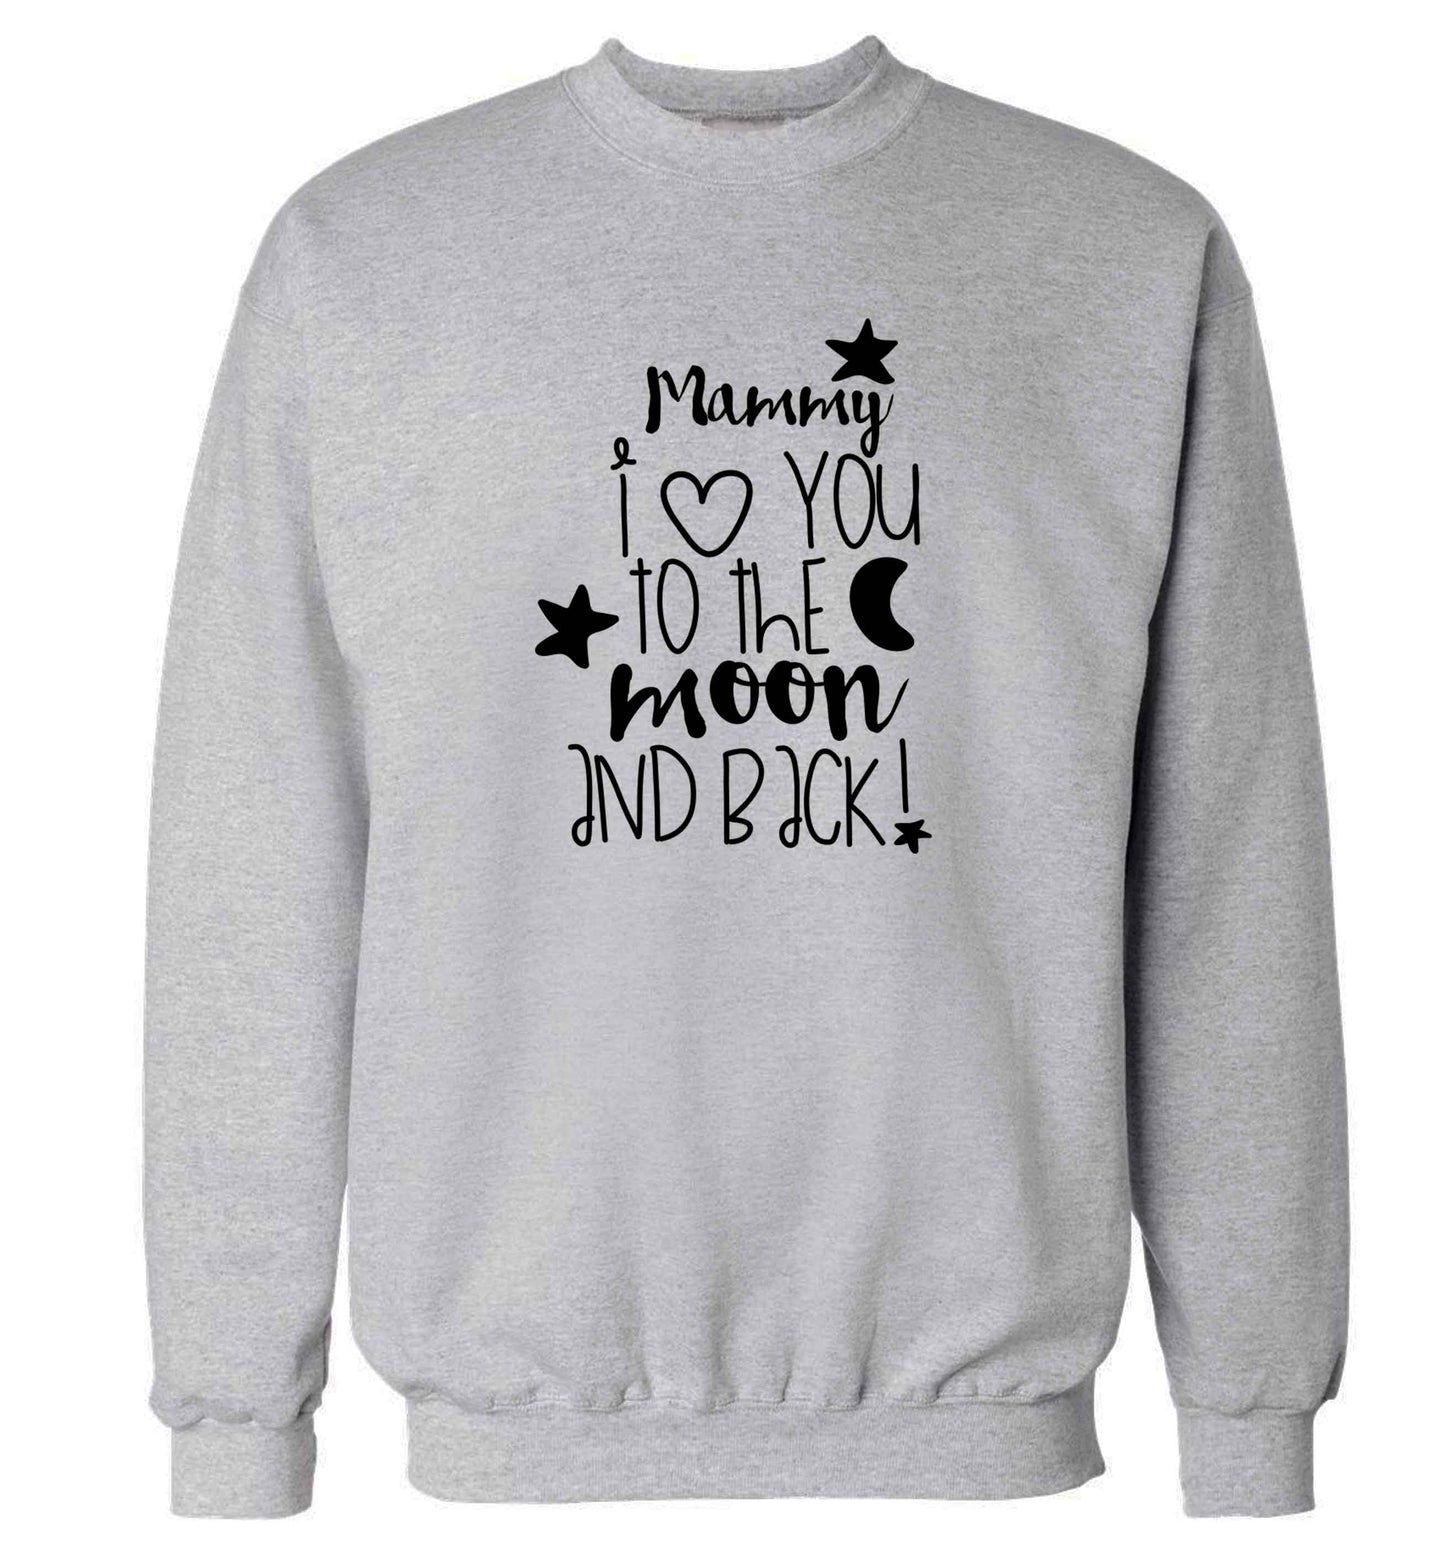 Mammy I love you to the moon and back adult's unisex grey sweater 2XL